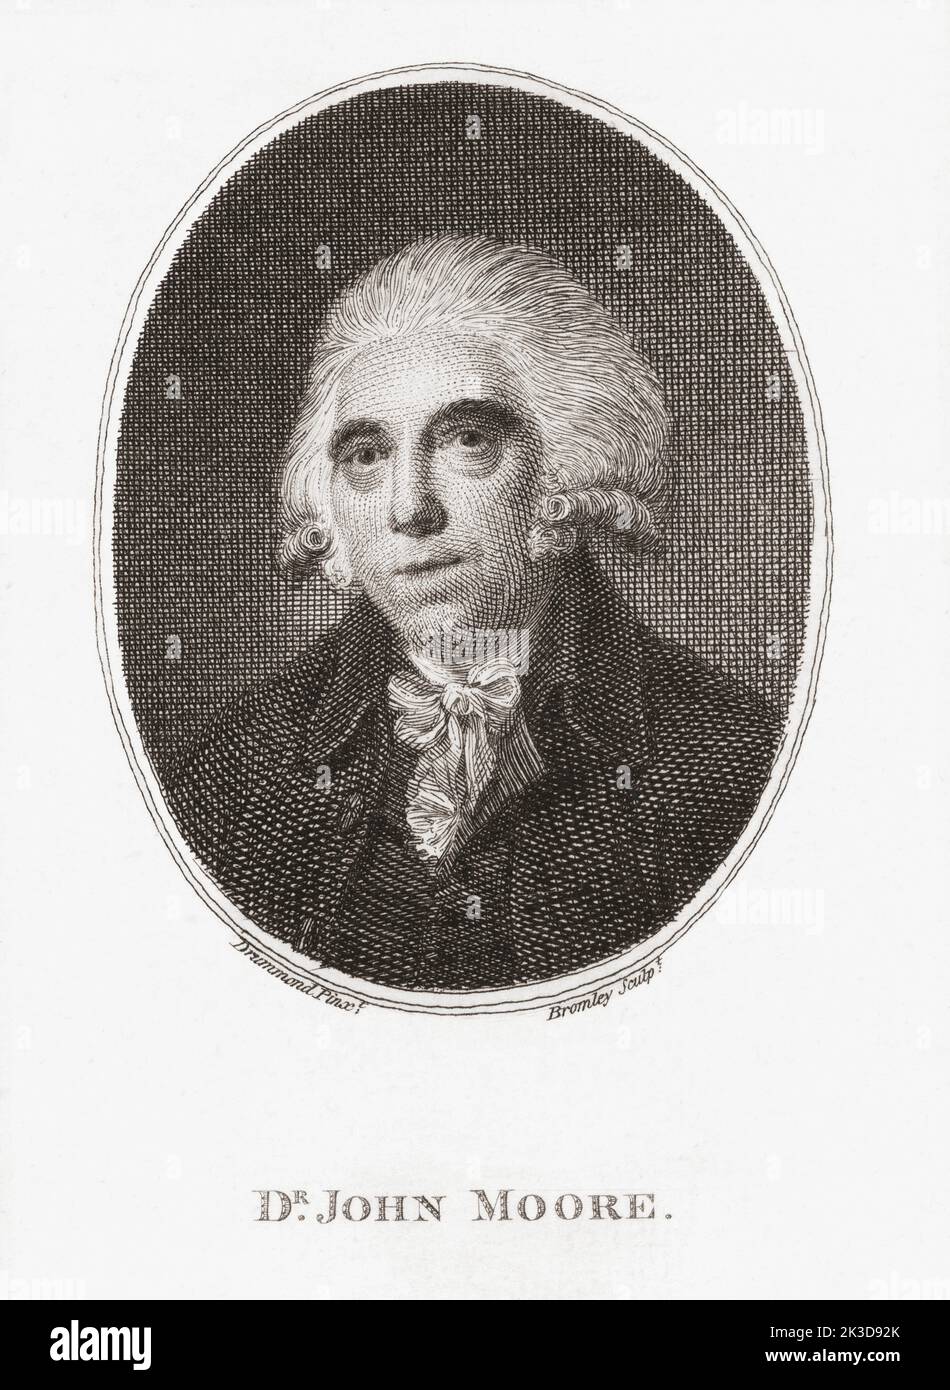 John Moore, 1729 - 1802.  Scottish doctor, novelist, travel author and Fellow of the Royal Society of Edinburgh.  After a painting by Samuel Drummond.  Engraved by William Bromley. Stock Photo